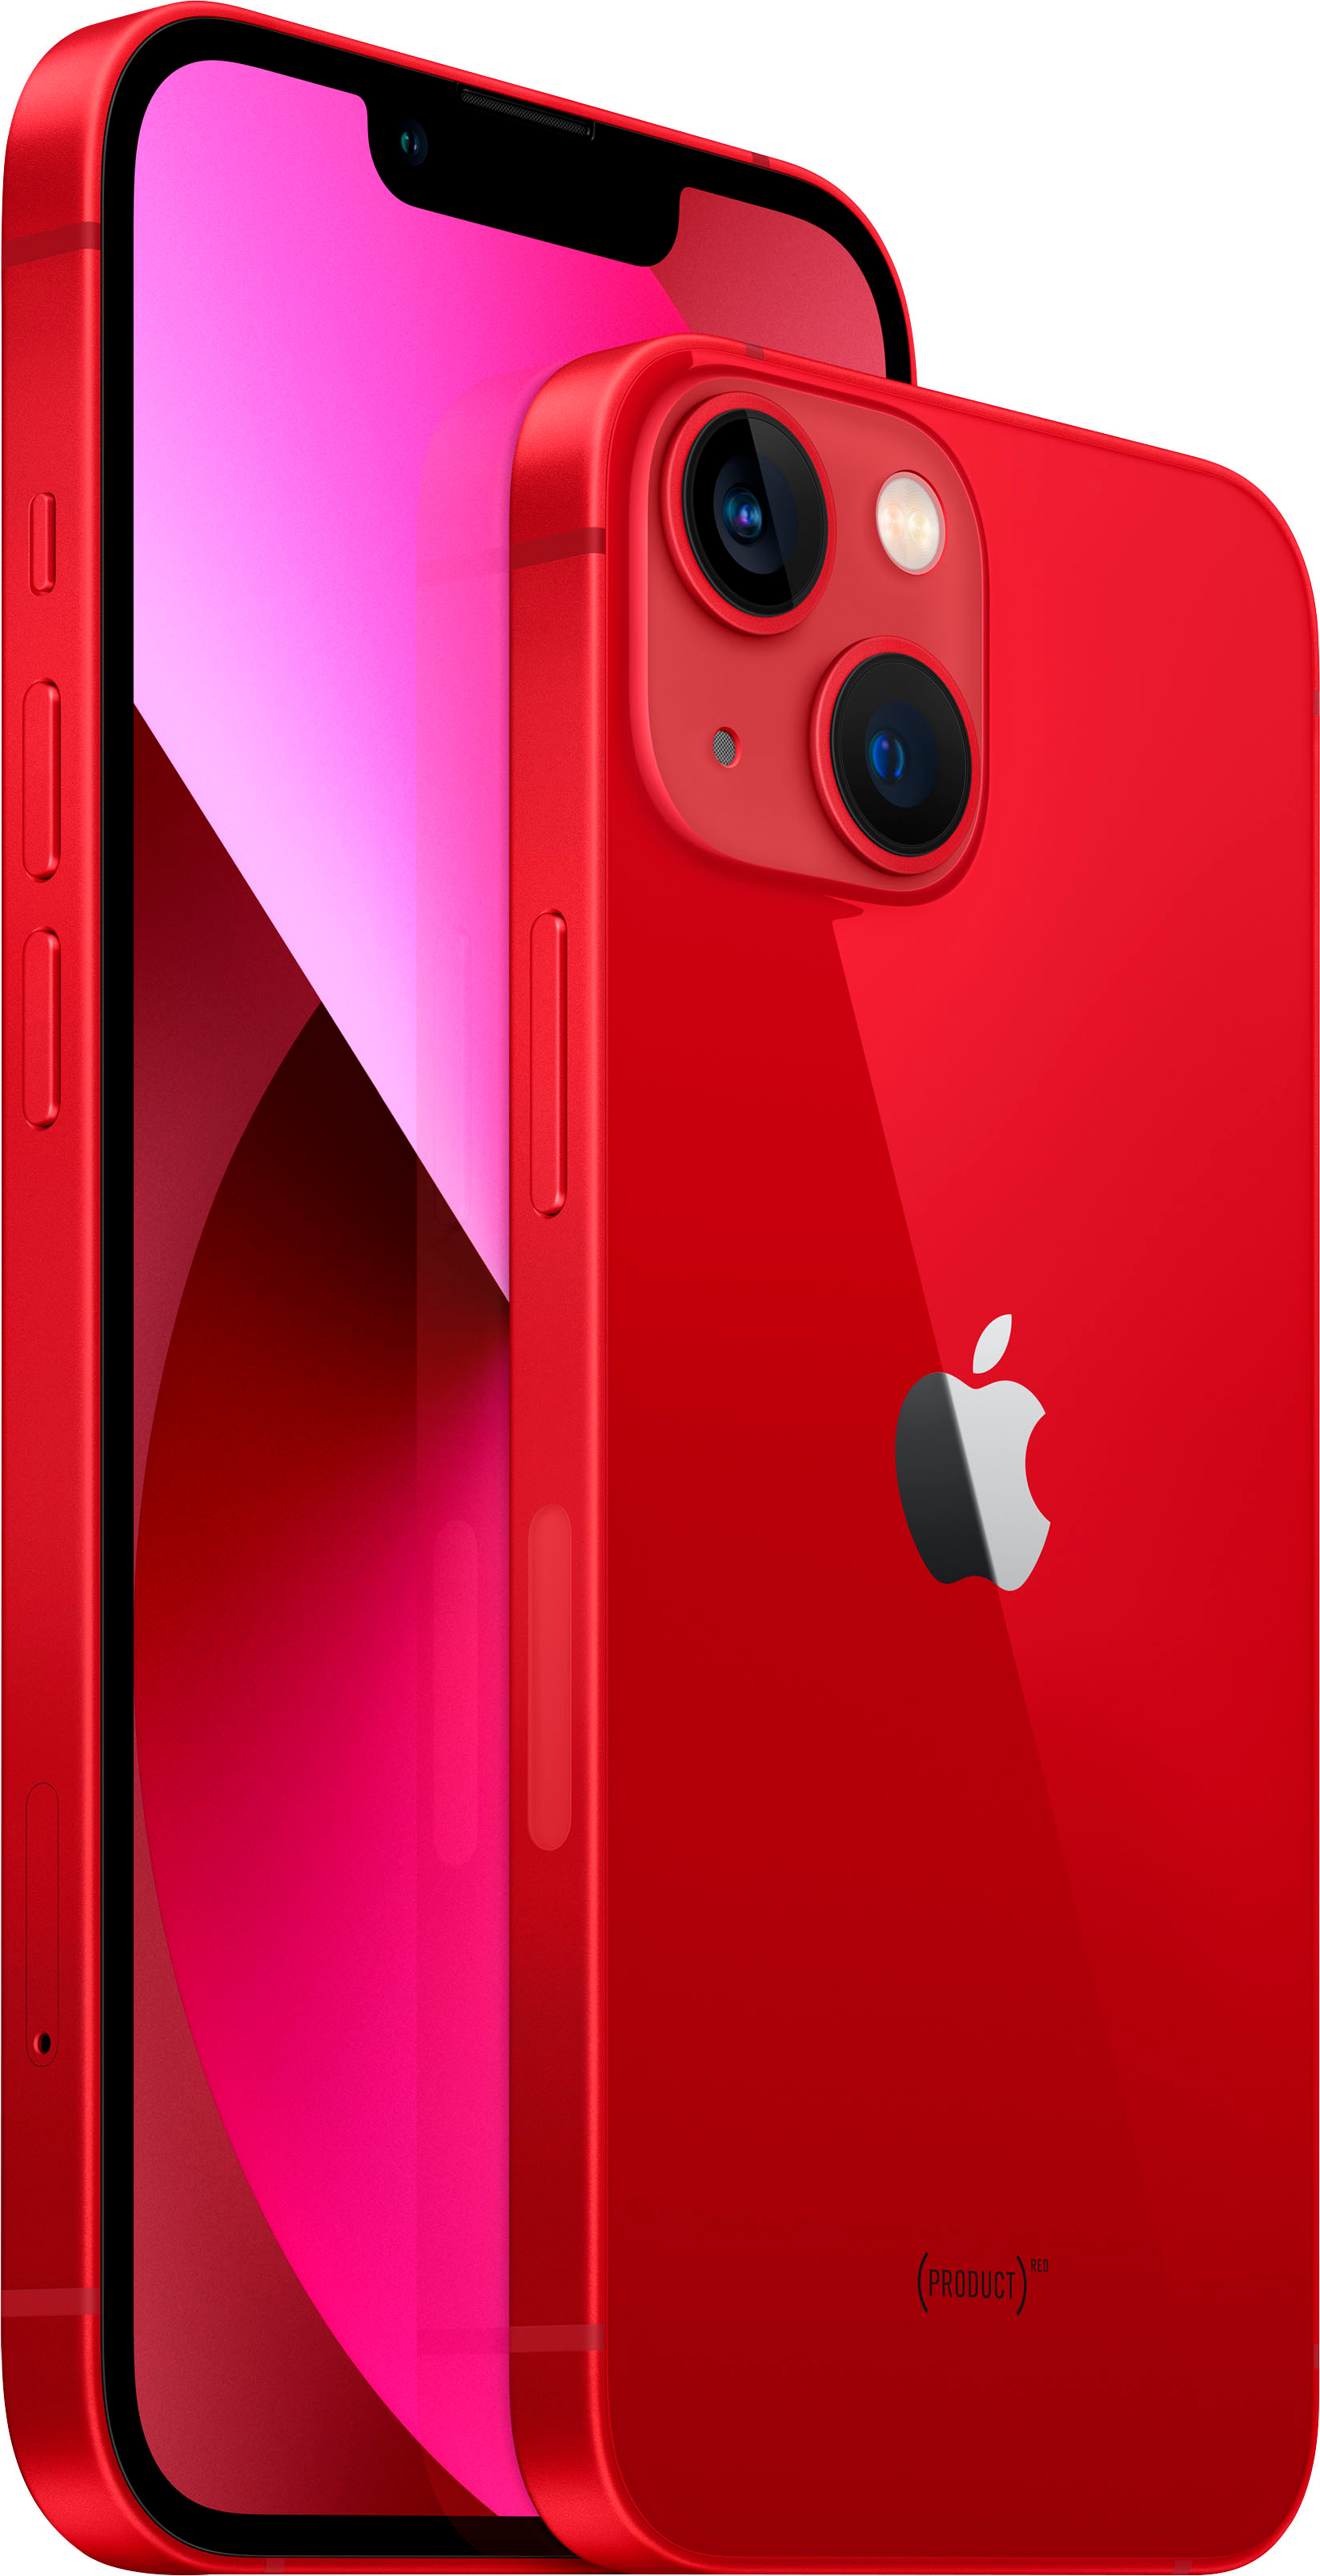 Apple iPhone 13 5G Best - (Unlocked) (PRODUCT)RED Buy MMM93LL/A 128GB